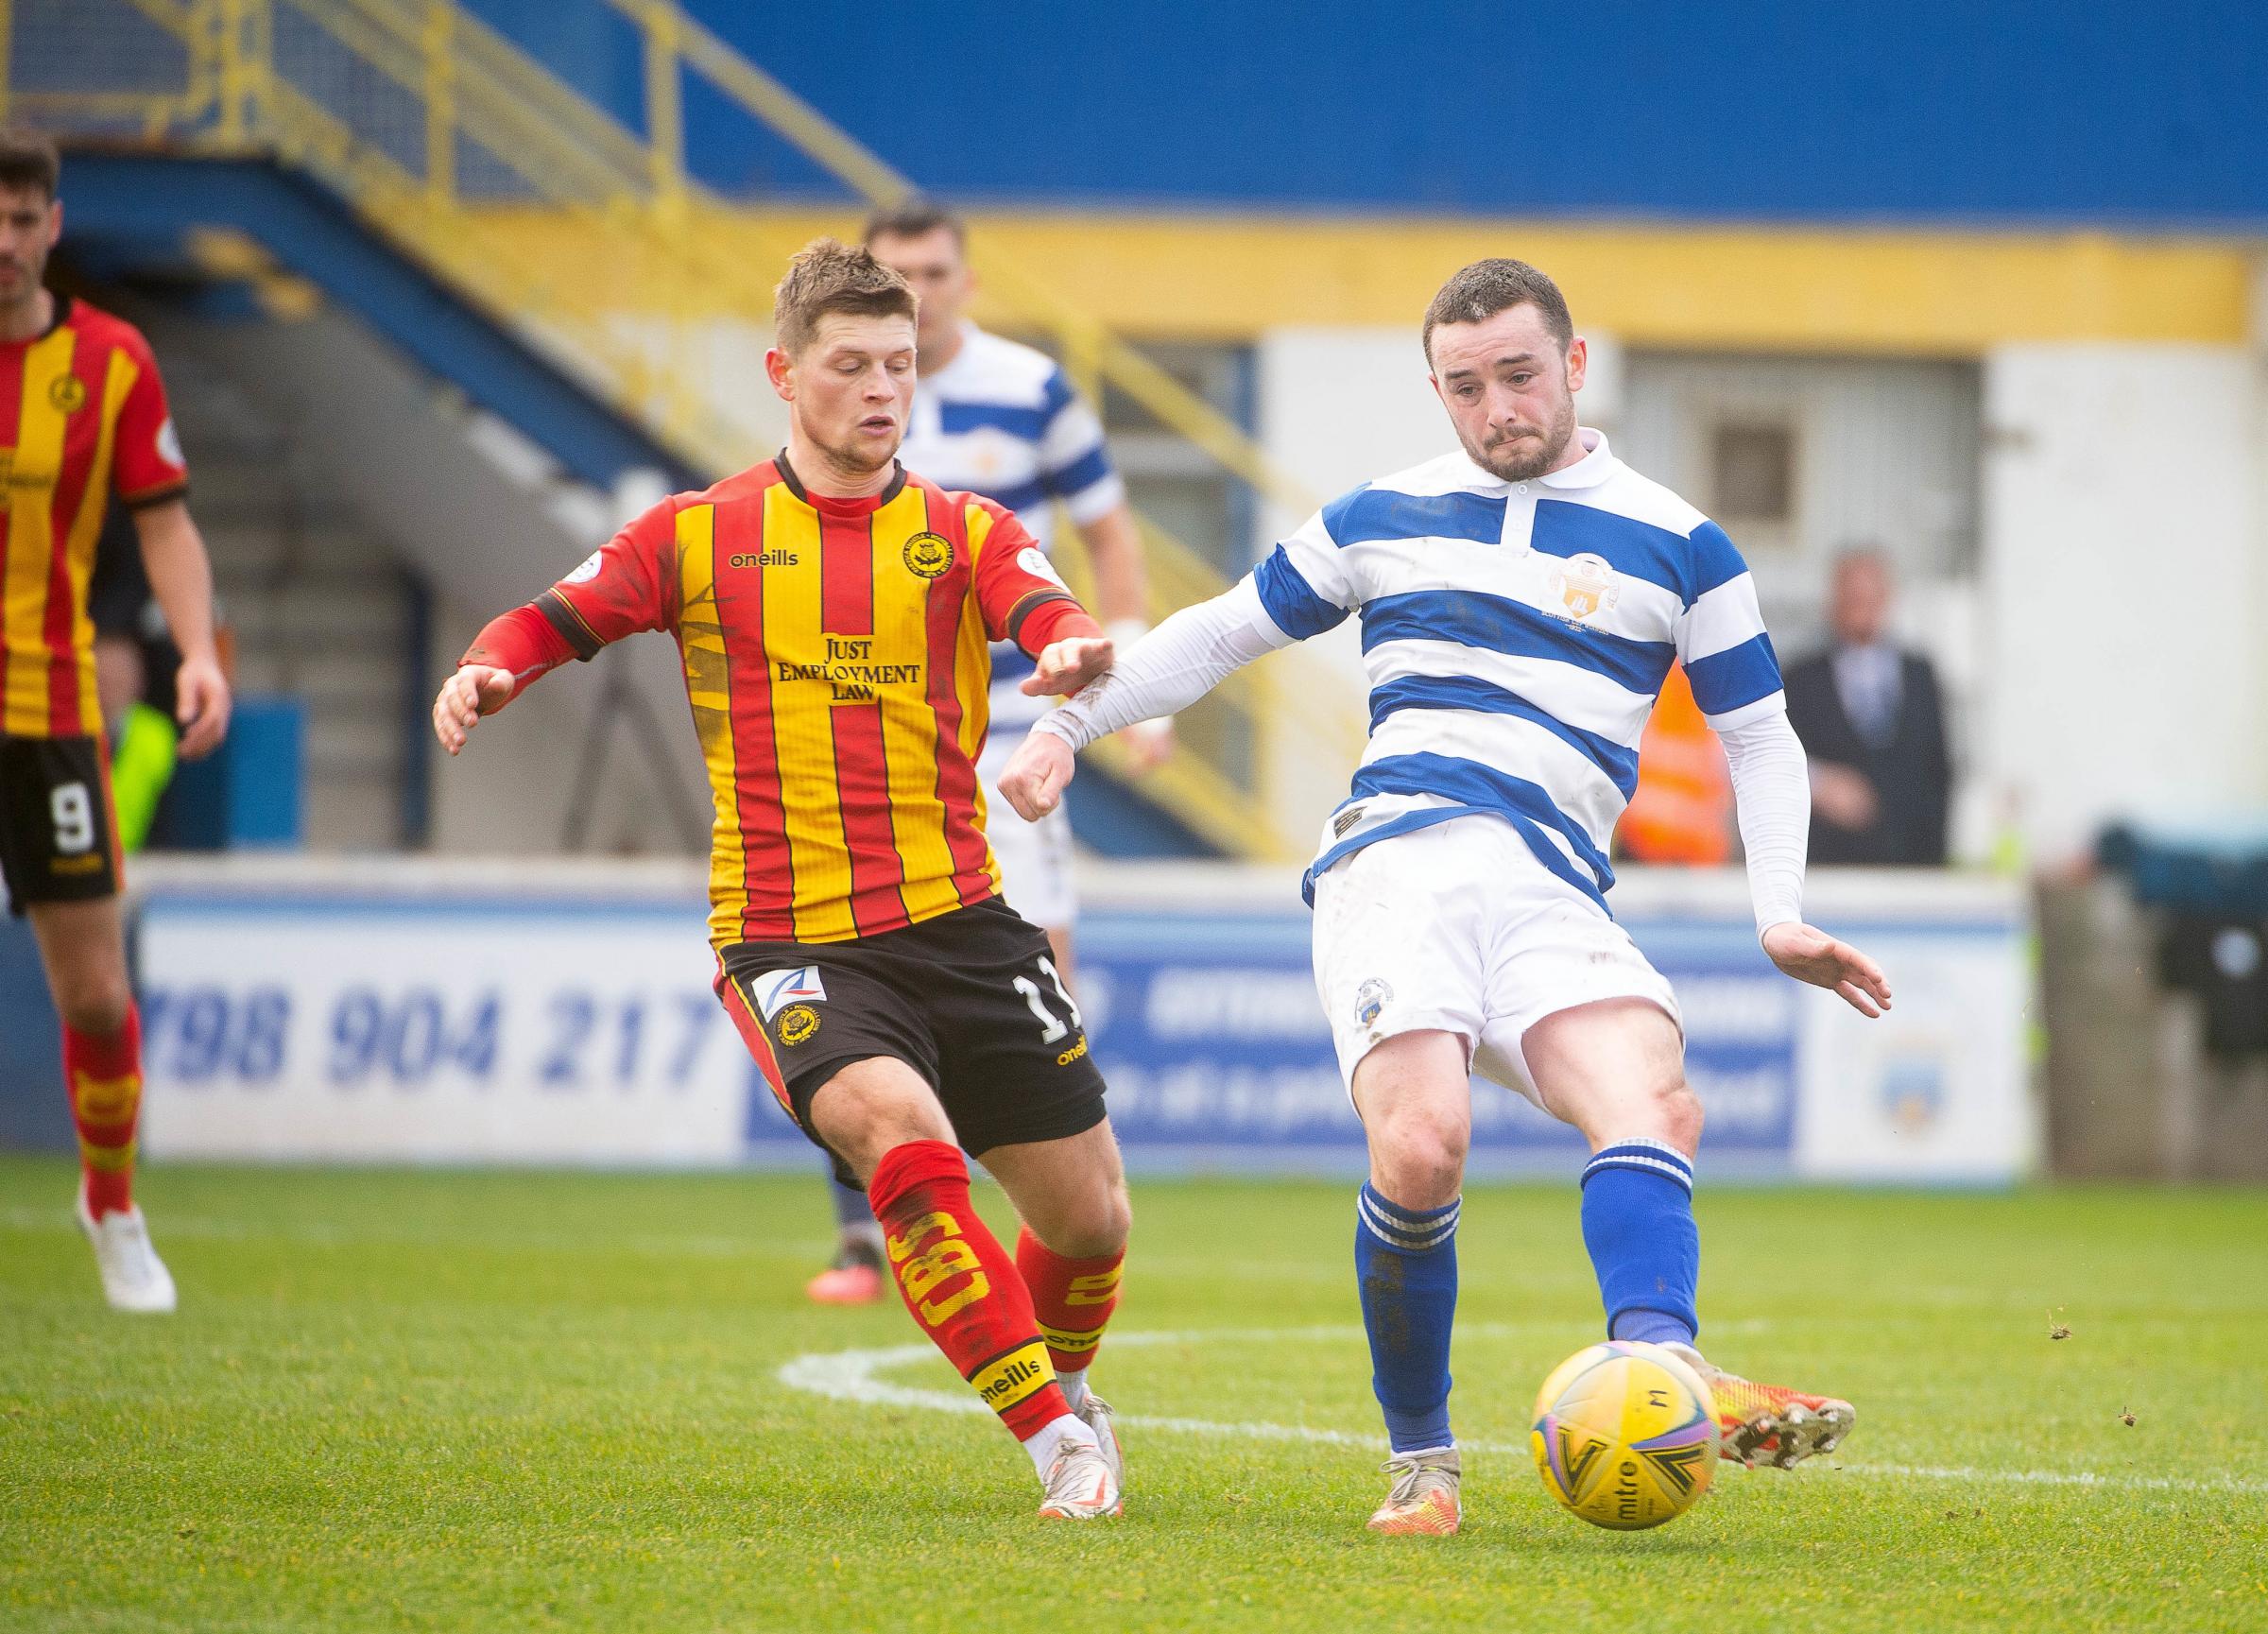 Morton defender Lewis Strapp honoured to win double in club awards